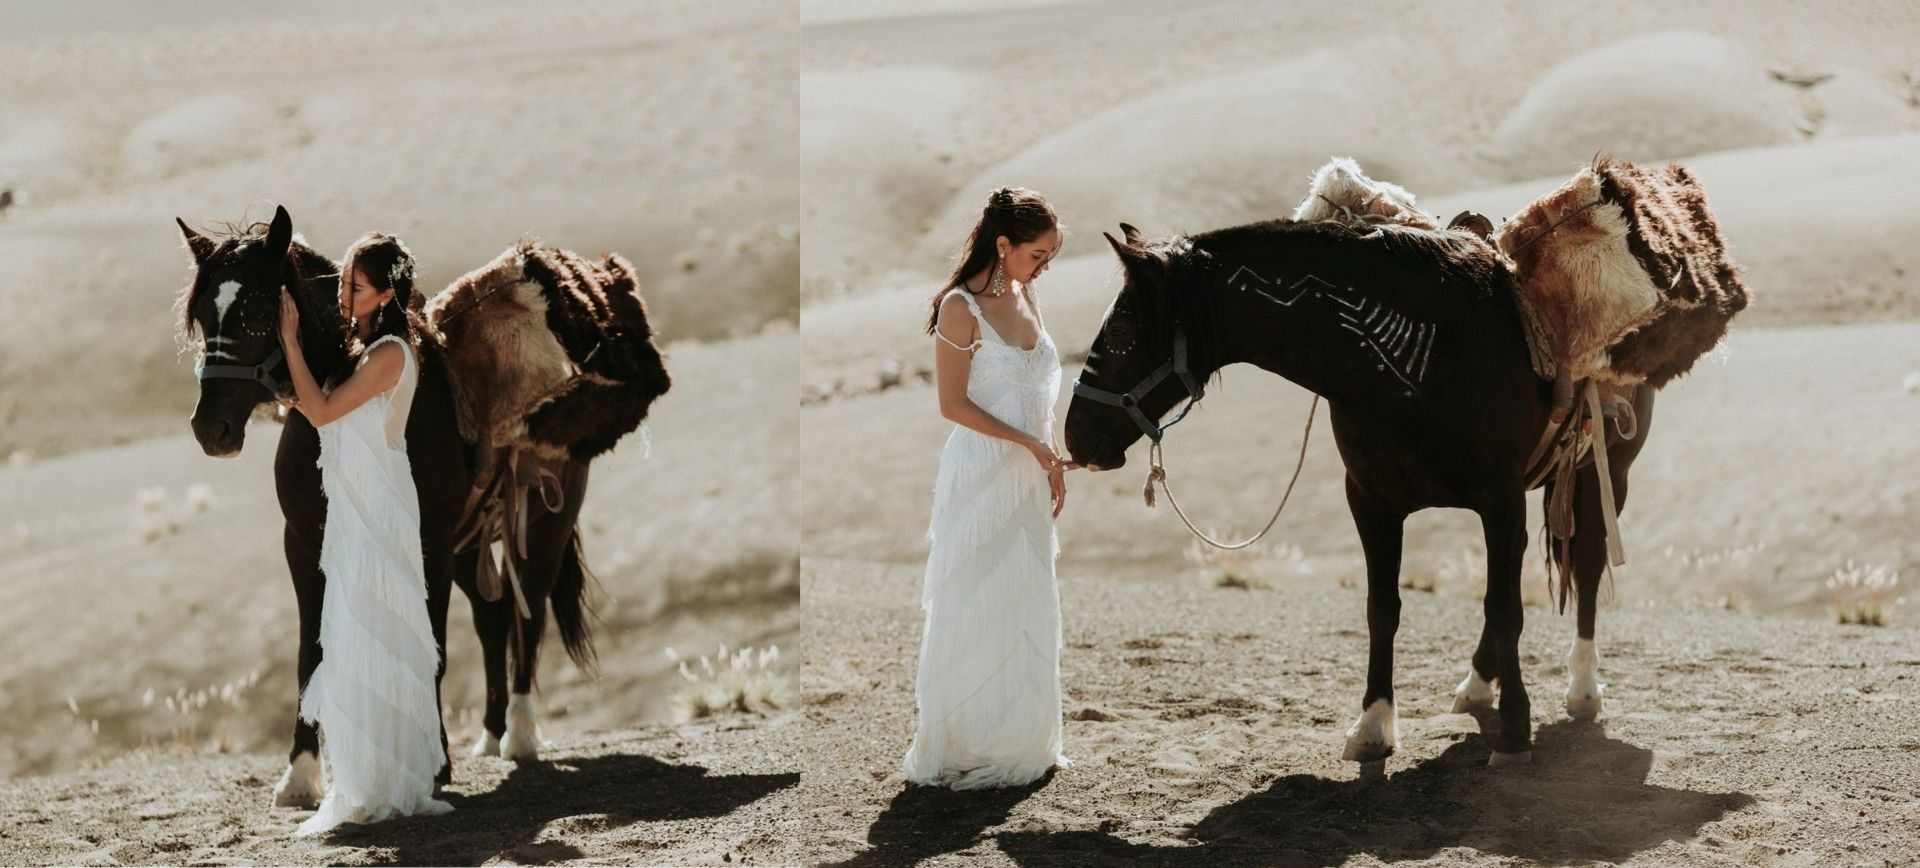 horse-riding-honeymoon Chile - bride with horse